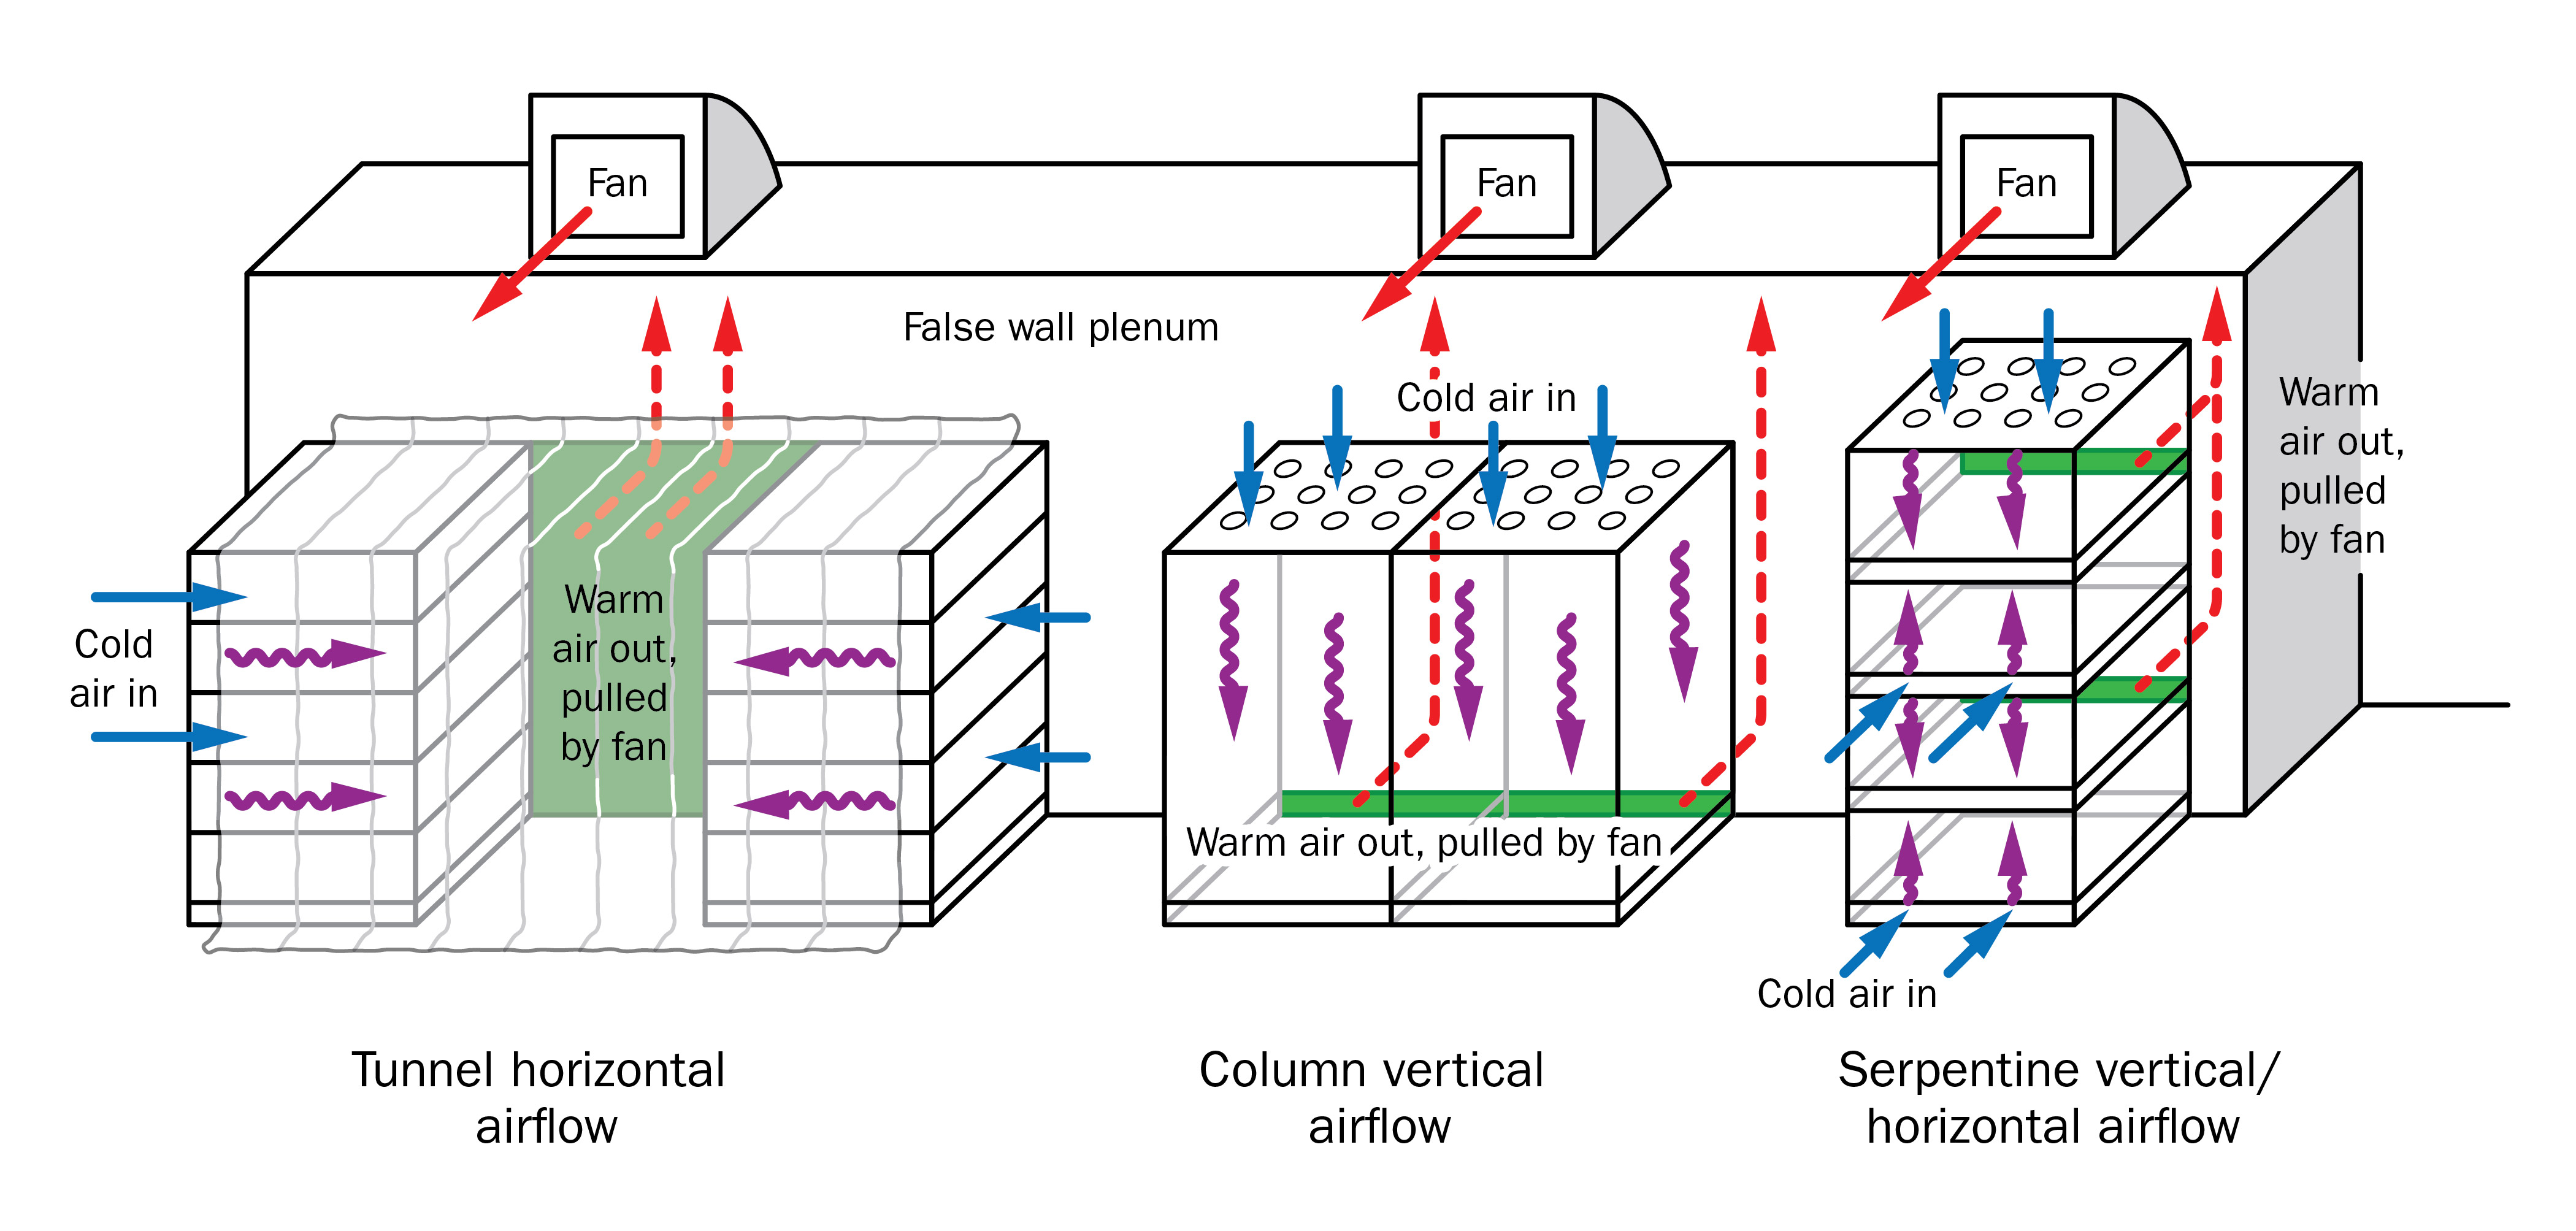 Cold, refrigerated air (blue arrows) is pulled through containers by high-capacity fans in a false wall plenum within a cold storage. These fans create a partial vacuum and pull air through strategically located openings (green shading) in the plenum. Produce cools primarily by the convective action of high-speed cold air, when it picks up field heat from warm produce (purple arrows) as it passes around the produce. The warmed air (red arrows) is then blown back into the cold storage to the evaporator coils of the refrigeration system to be re-cooled.